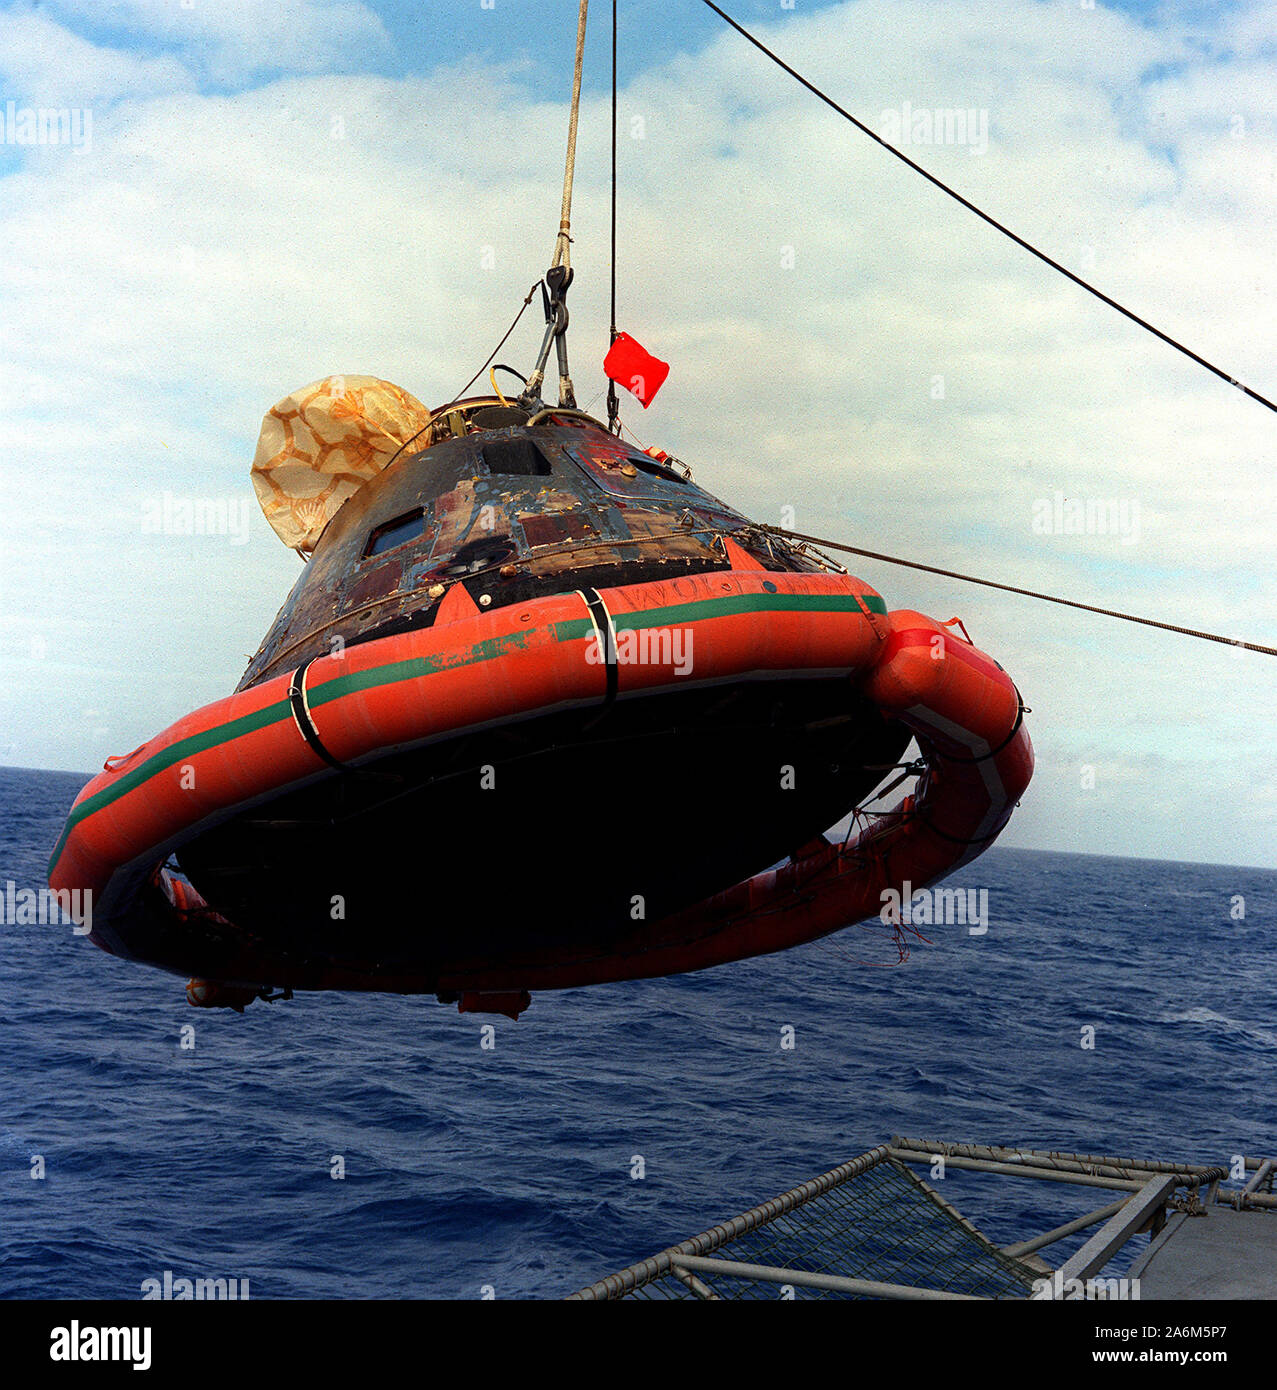 The Apollo 11 Command Module is hoisted aboard the USS Hornet, the prime recovery vessel for the historic Apollo 11 lunar landing mission. The splashdown took place at 12:49 p.m. ET, July 24, 1969, about 812 nautical miles southwest of Hawaii, only 12 nautical miles from the USS Hornet. Stock Photo